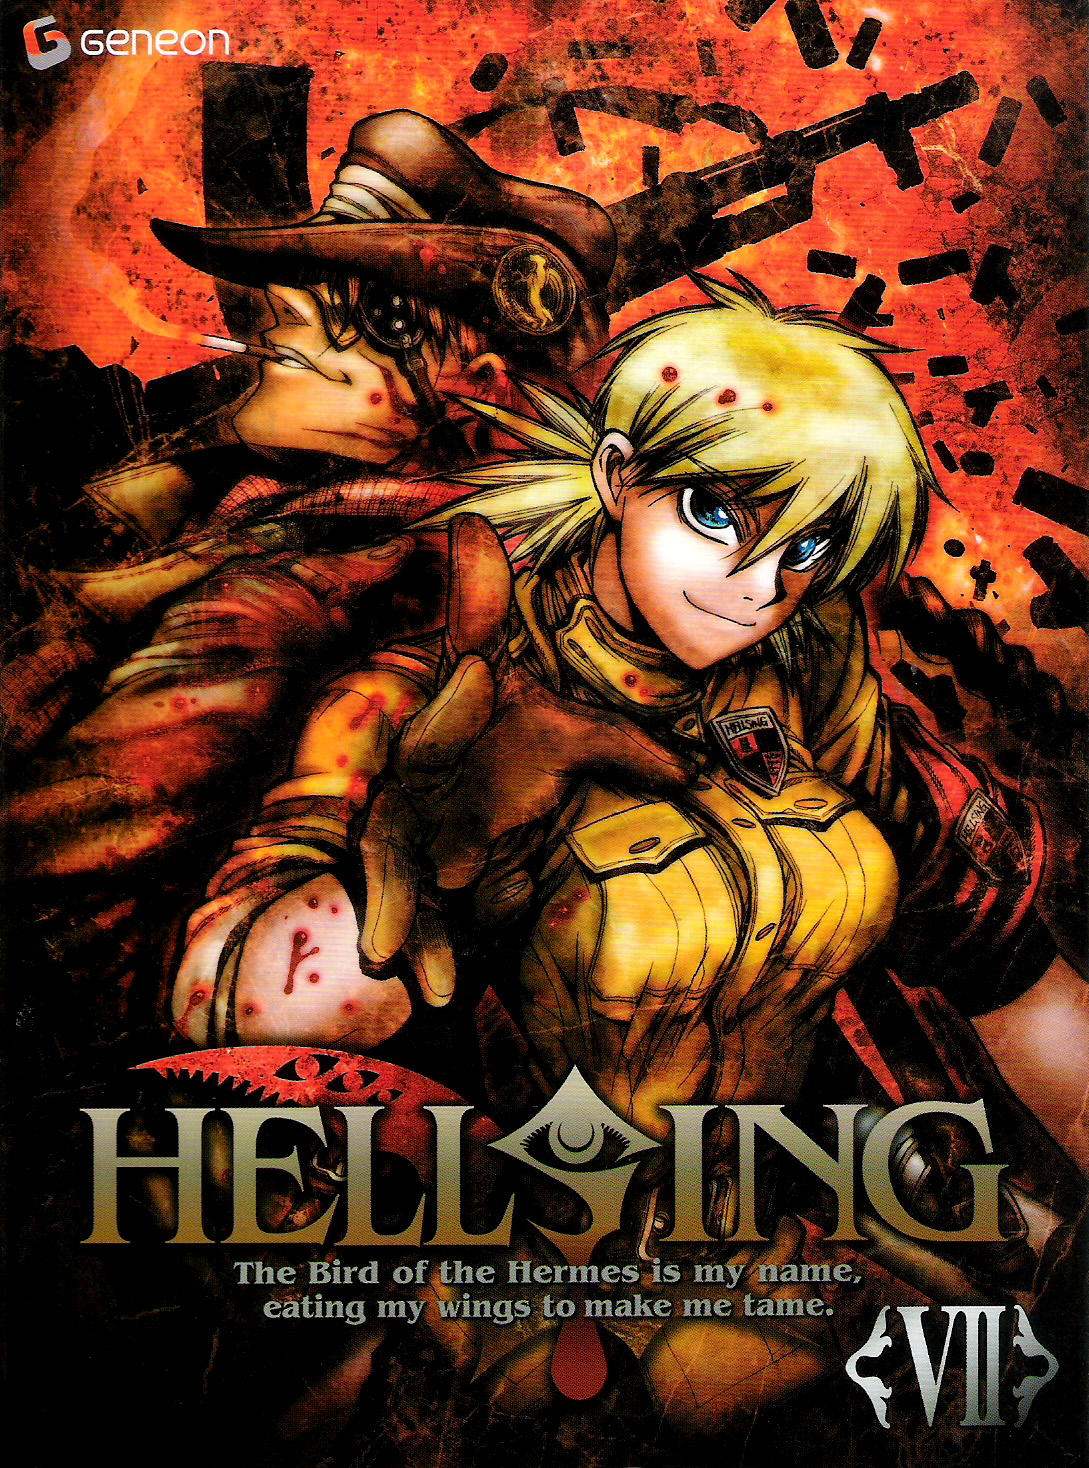 Hellsing Ultimate; Who's really the bad guy? – The Birds of Hermes